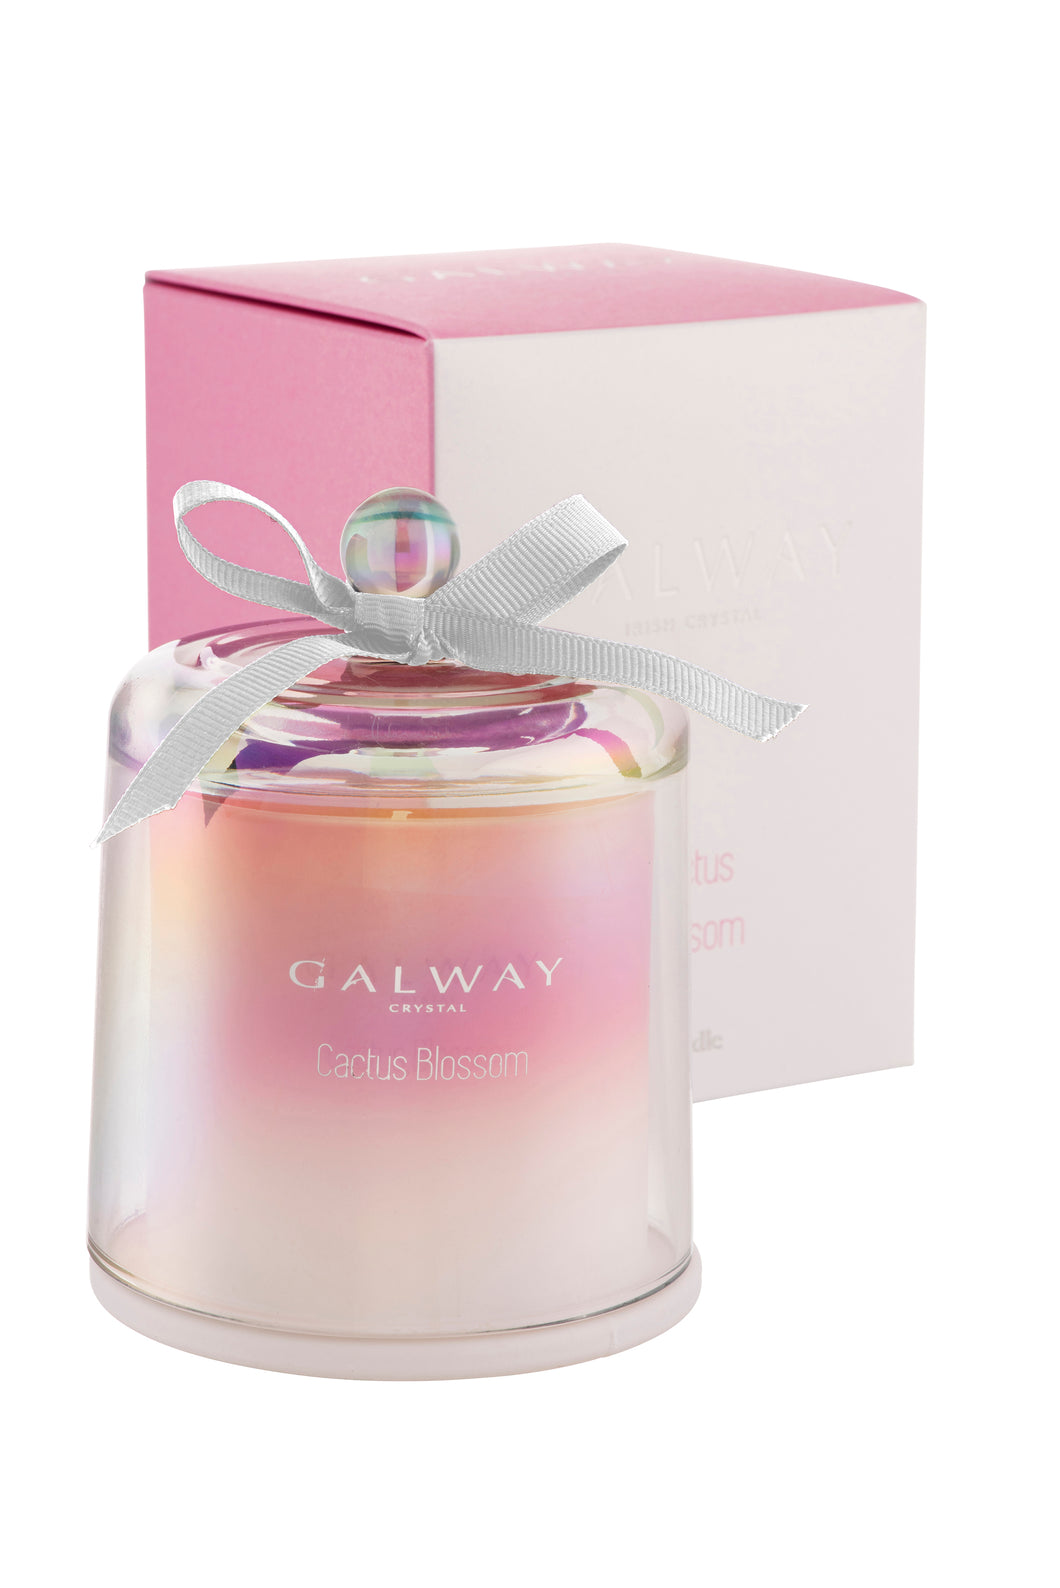 Galway Living - Cactus Blossom Candle